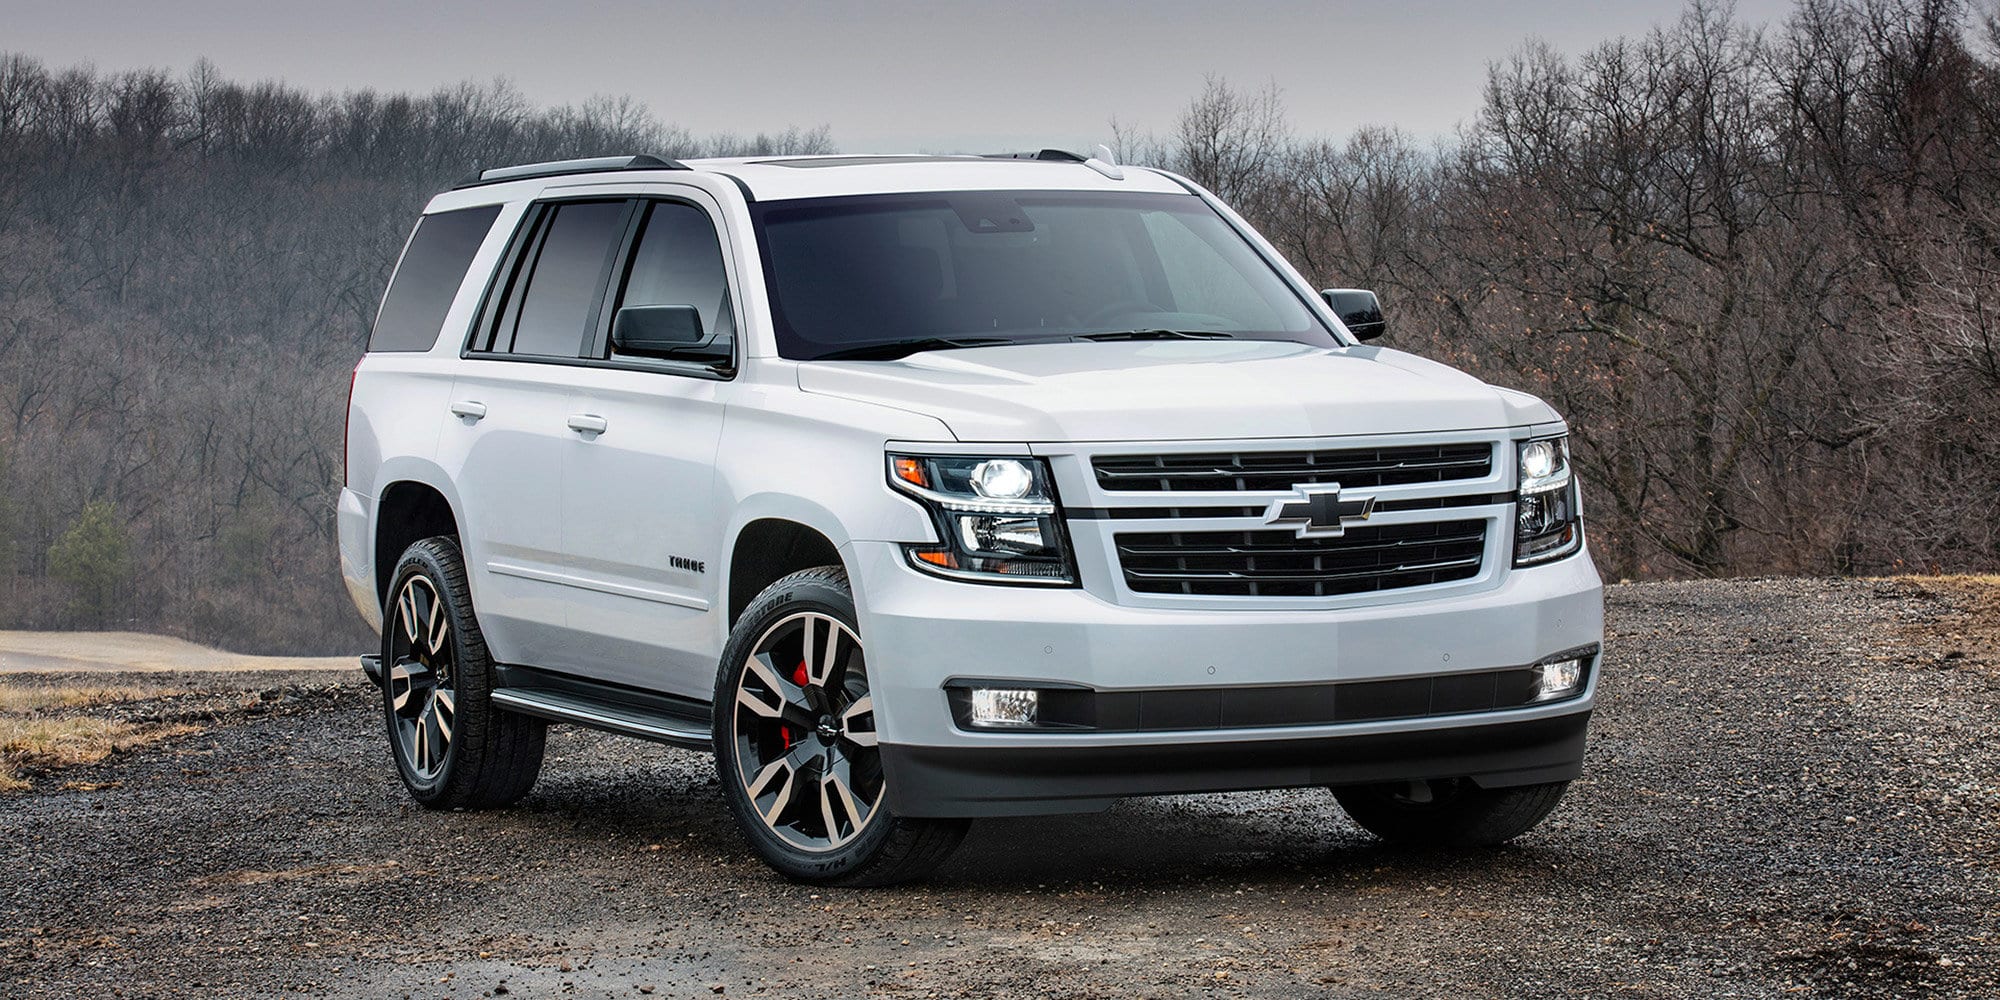 2019 Chevrolet Tahoe Rumors, Features, Price ( Concept Images, Redesign) Release Date